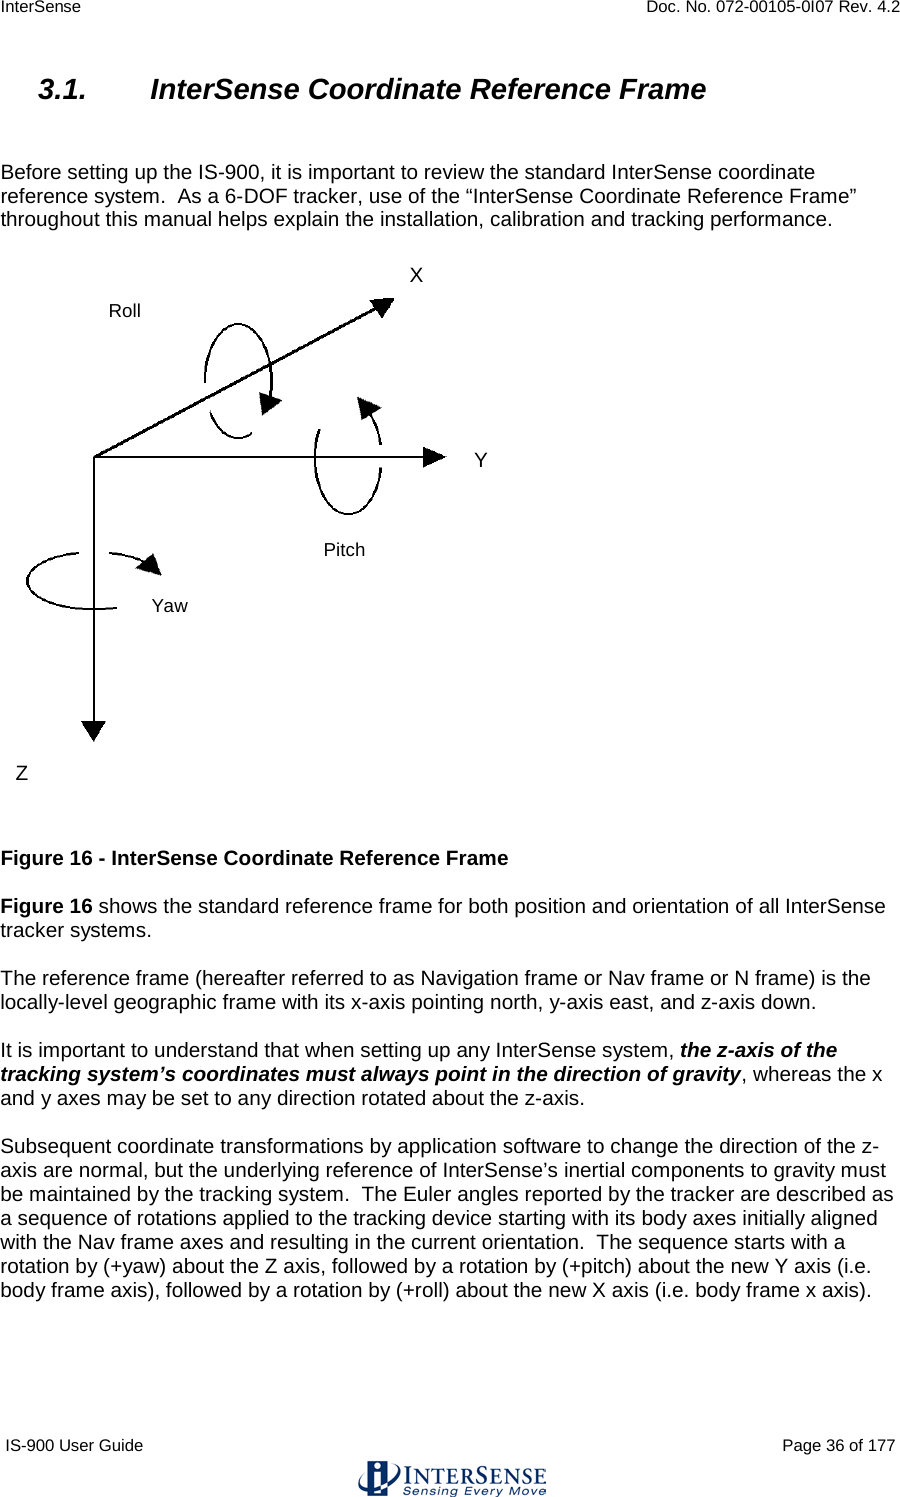 InterSense    Doc. No. 072-00105-0I07 Rev. 4.2 IS-900 User Guide                                                                                                                                          Page 36 of 177  3.1. InterSense Coordinate Reference Frame   Before setting up the IS-900, it is important to review the standard InterSense coordinate reference system.  As a 6-DOF tracker, use of the “InterSense Coordinate Reference Frame” throughout this manual helps explain the installation, calibration and tracking performance.     Figure 16 - InterSense Coordinate Reference Frame  Figure 16 shows the standard reference frame for both position and orientation of all InterSense tracker systems.  The reference frame (hereafter referred to as Navigation frame or Nav frame or N frame) is the locally-level geographic frame with its x-axis pointing north, y-axis east, and z-axis down.    It is important to understand that when setting up any InterSense system, the z-axis of the tracking system’s coordinates must always point in the direction of gravity, whereas the x and y axes may be set to any direction rotated about the z-axis.    Subsequent coordinate transformations by application software to change the direction of the z-axis are normal, but the underlying reference of InterSense’s inertial components to gravity must be maintained by the tracking system.  The Euler angles reported by the tracker are described as a sequence of rotations applied to the tracking device starting with its body axes initially aligned with the Nav frame axes and resulting in the current orientation.  The sequence starts with a rotation by (+yaw) about the Z axis, followed by a rotation by (+pitch) about the new Y axis (i.e. body frame axis), followed by a rotation by (+roll) about the new X axis (i.e. body frame x axis).   Yaw Roll Pitch X Y Z  